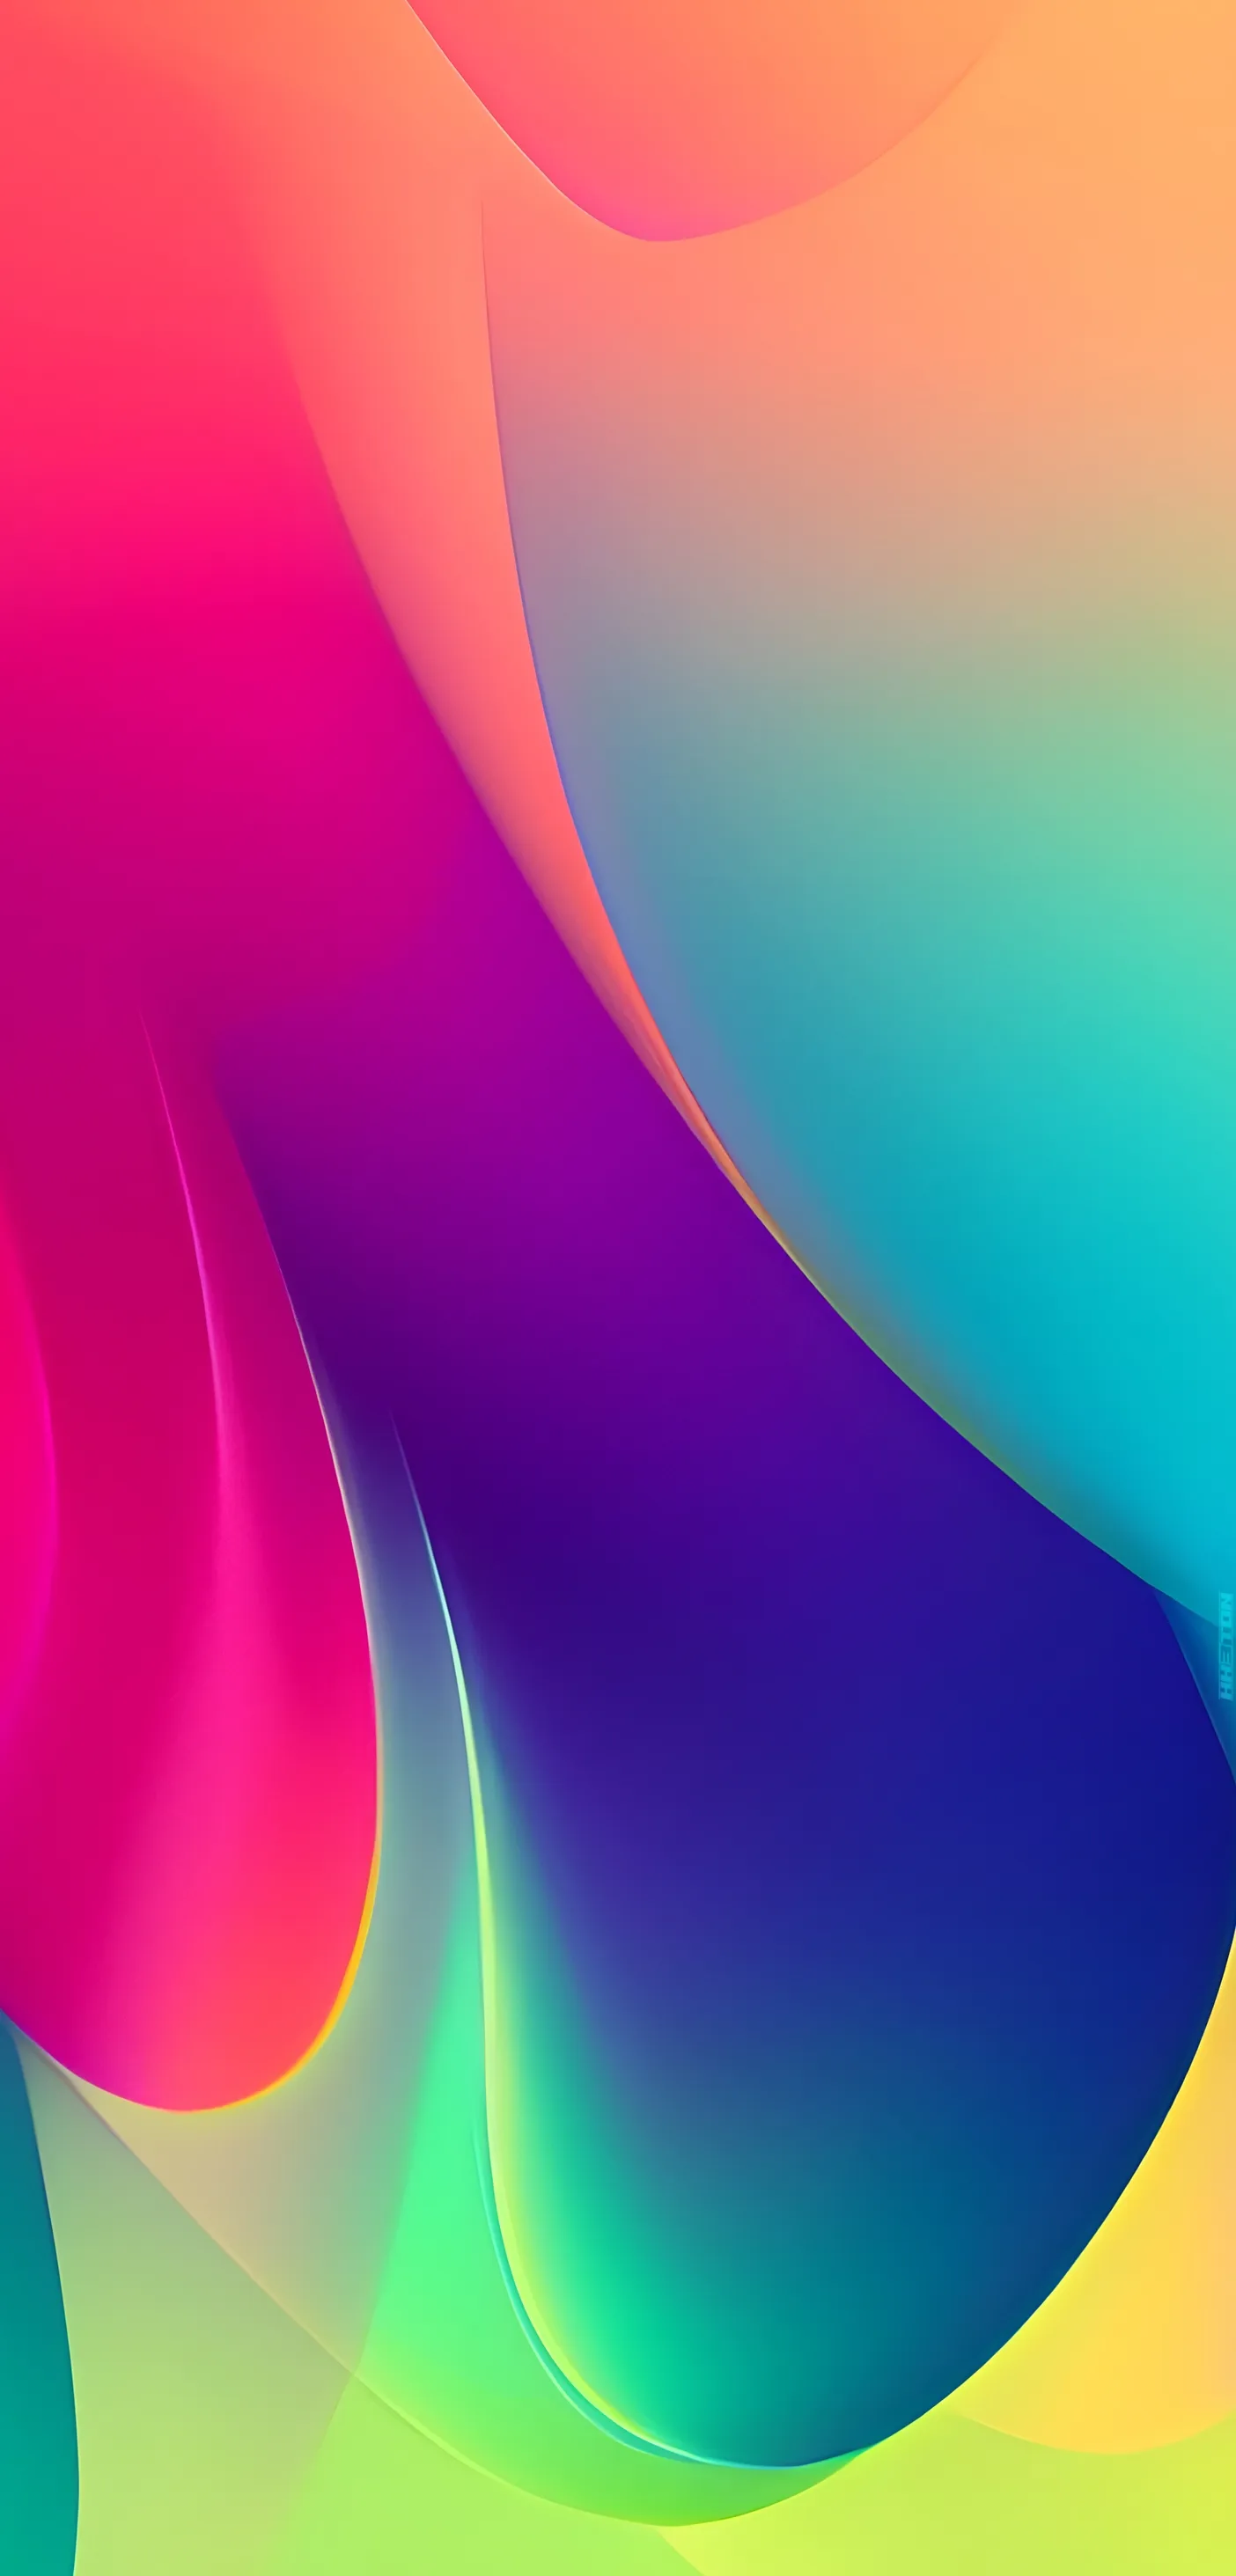 Abstract iPhone wallpaper for free HD - 052